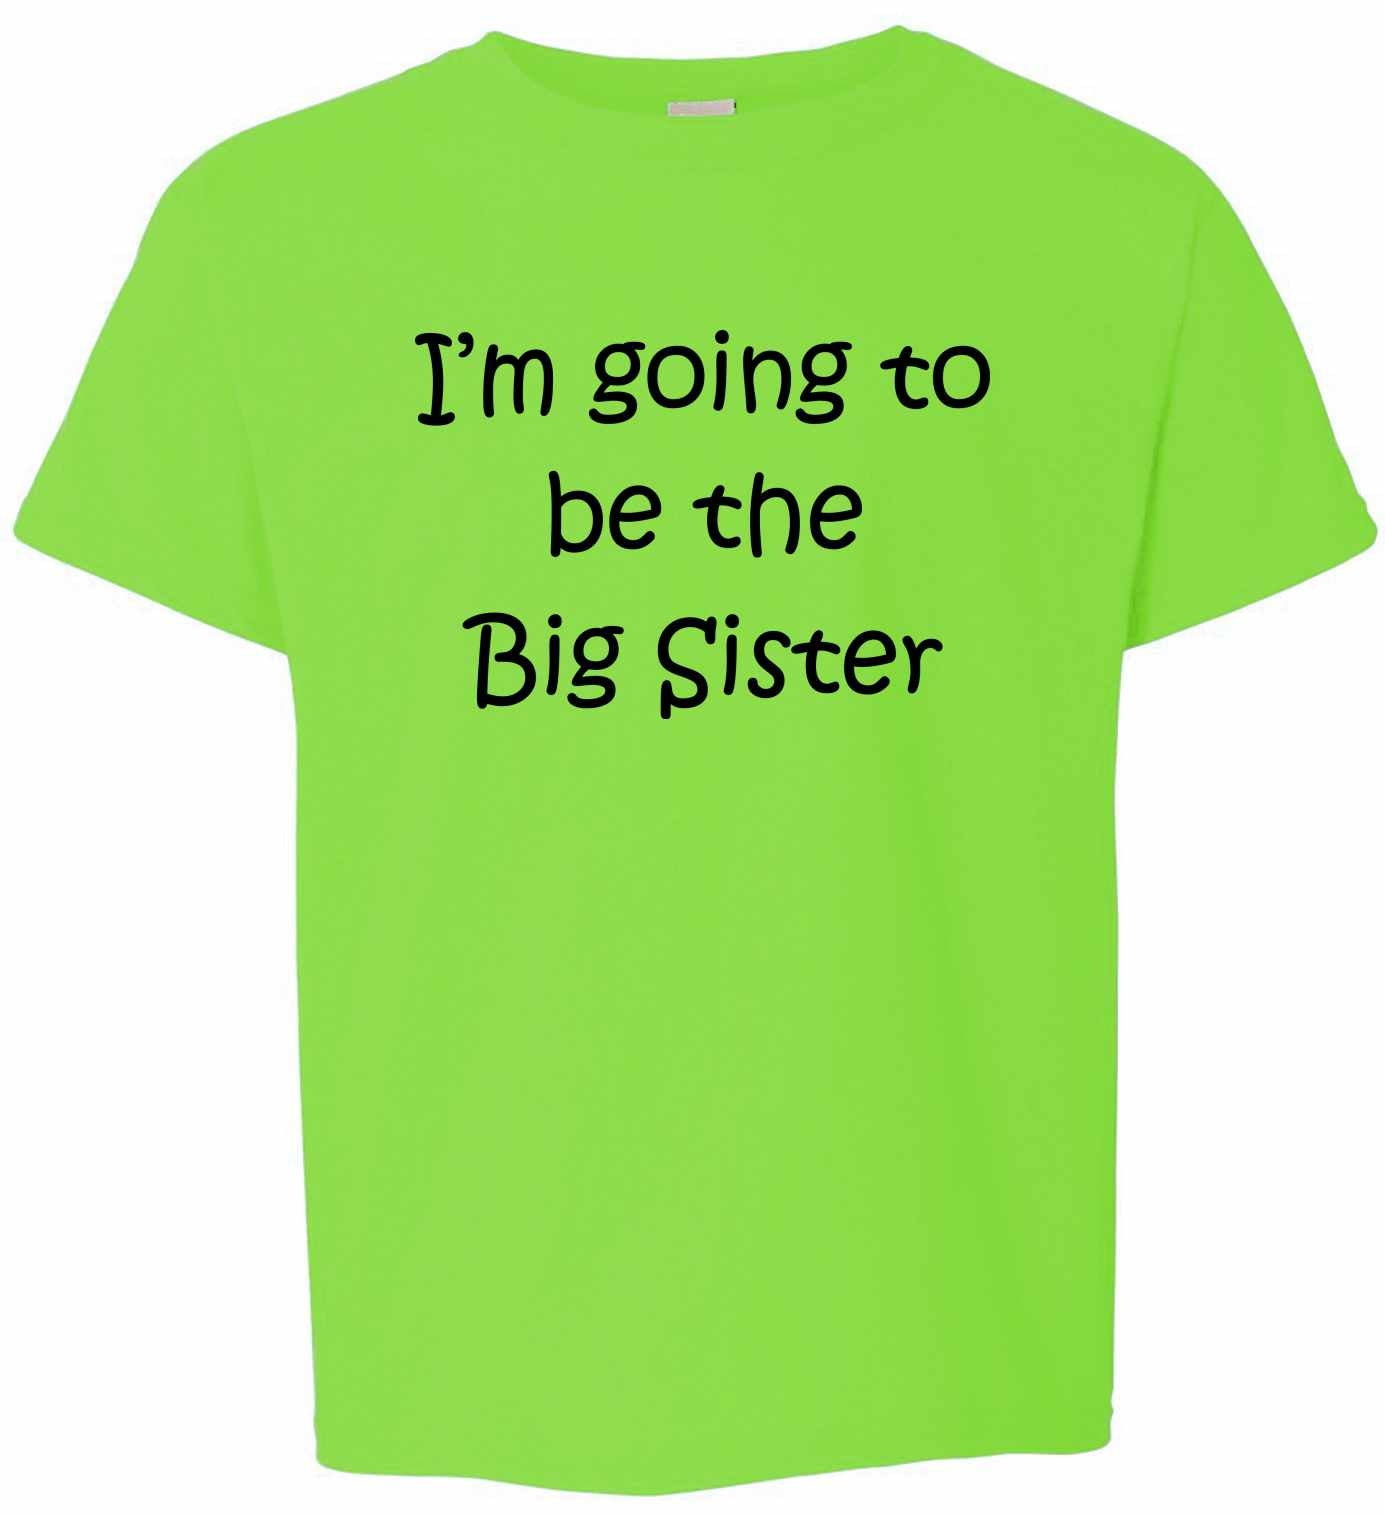 I'M GOING TO BE THE BIG SISTER on Kids T-Shirt (#578-201)